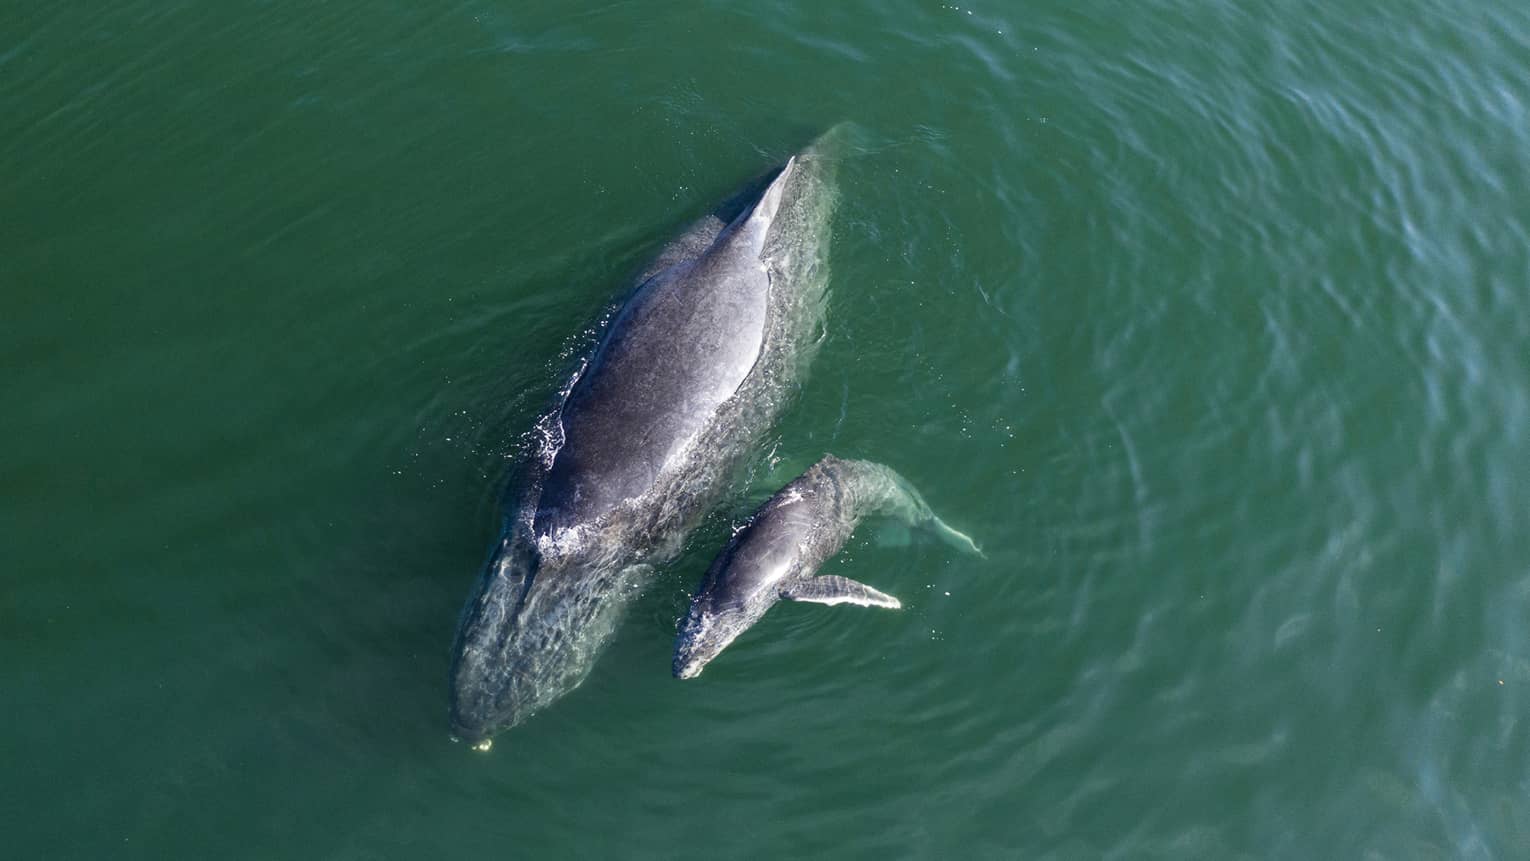 Overhead-view of a mother and baby whale, heads submerged and slippery-smooth backs breaching the calm teal water. 